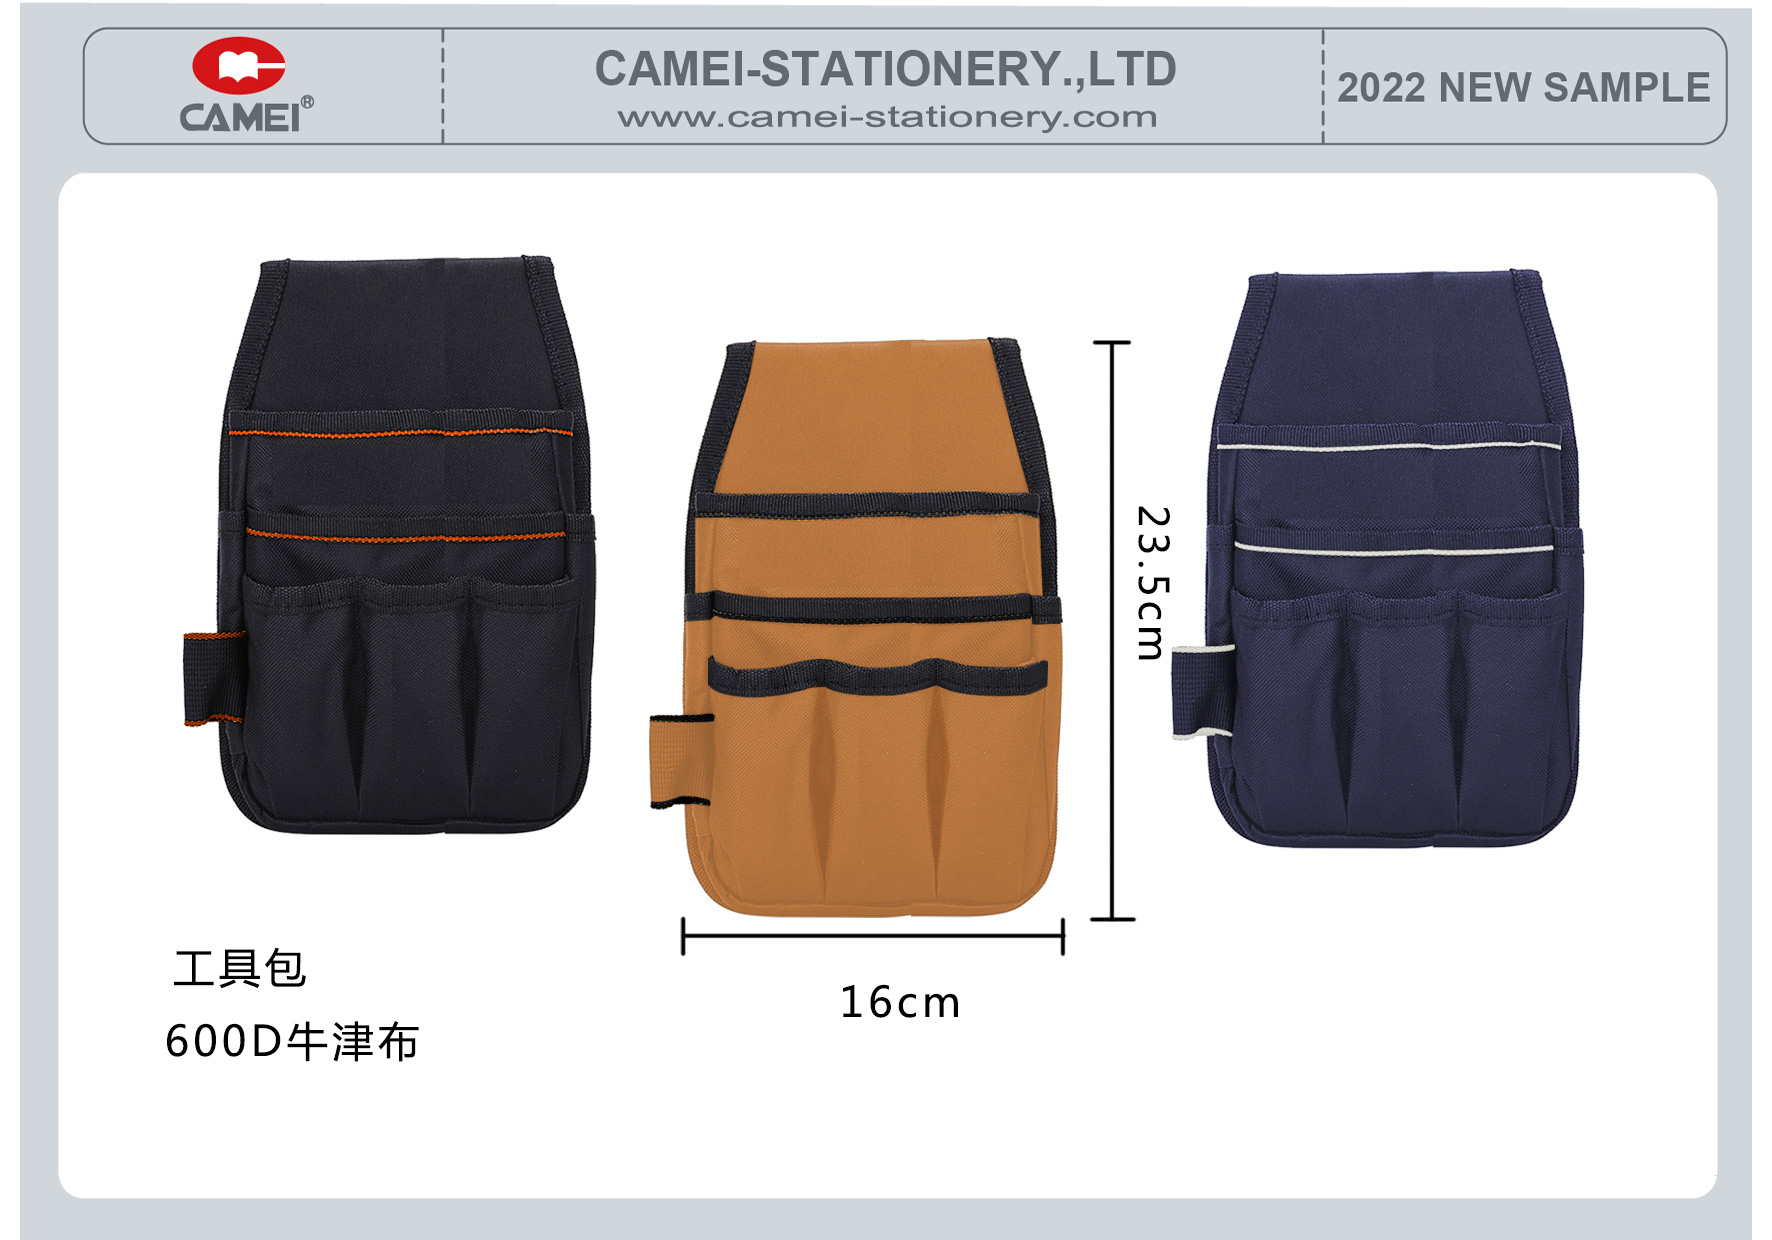 Hot sale customized 600D Oxford tool bag multi compartments of different sizes and depth gardening apron waist bag